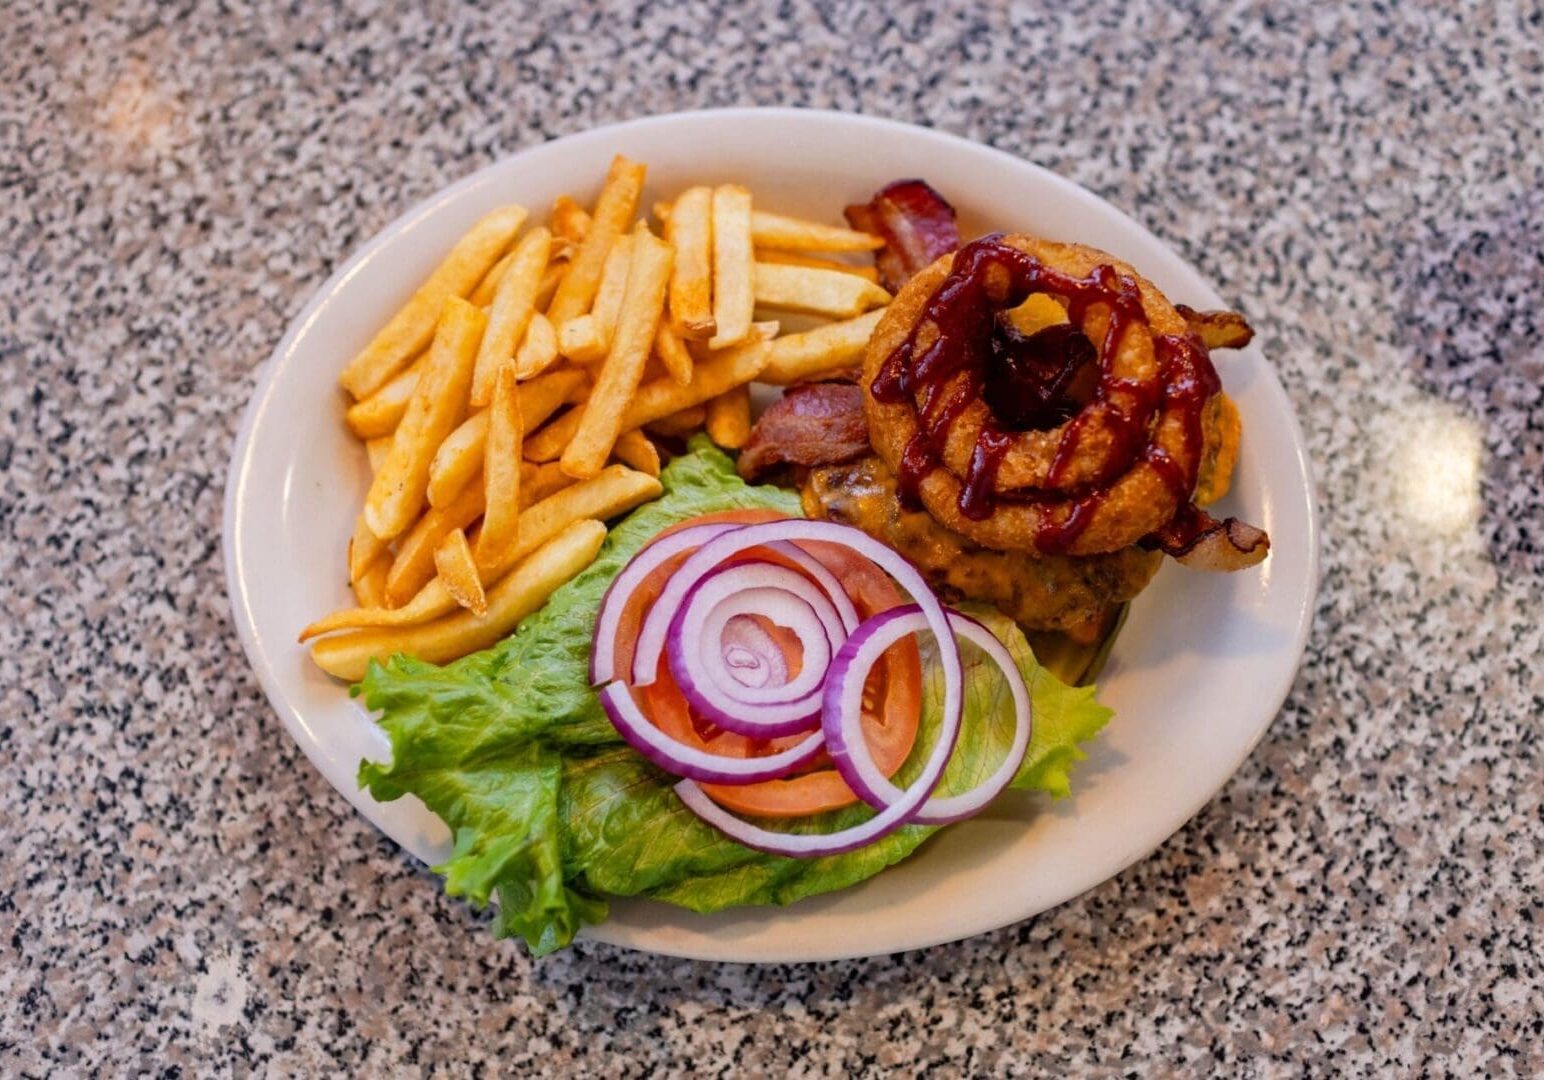 A plate of food with fries, onion rings and lettuce.